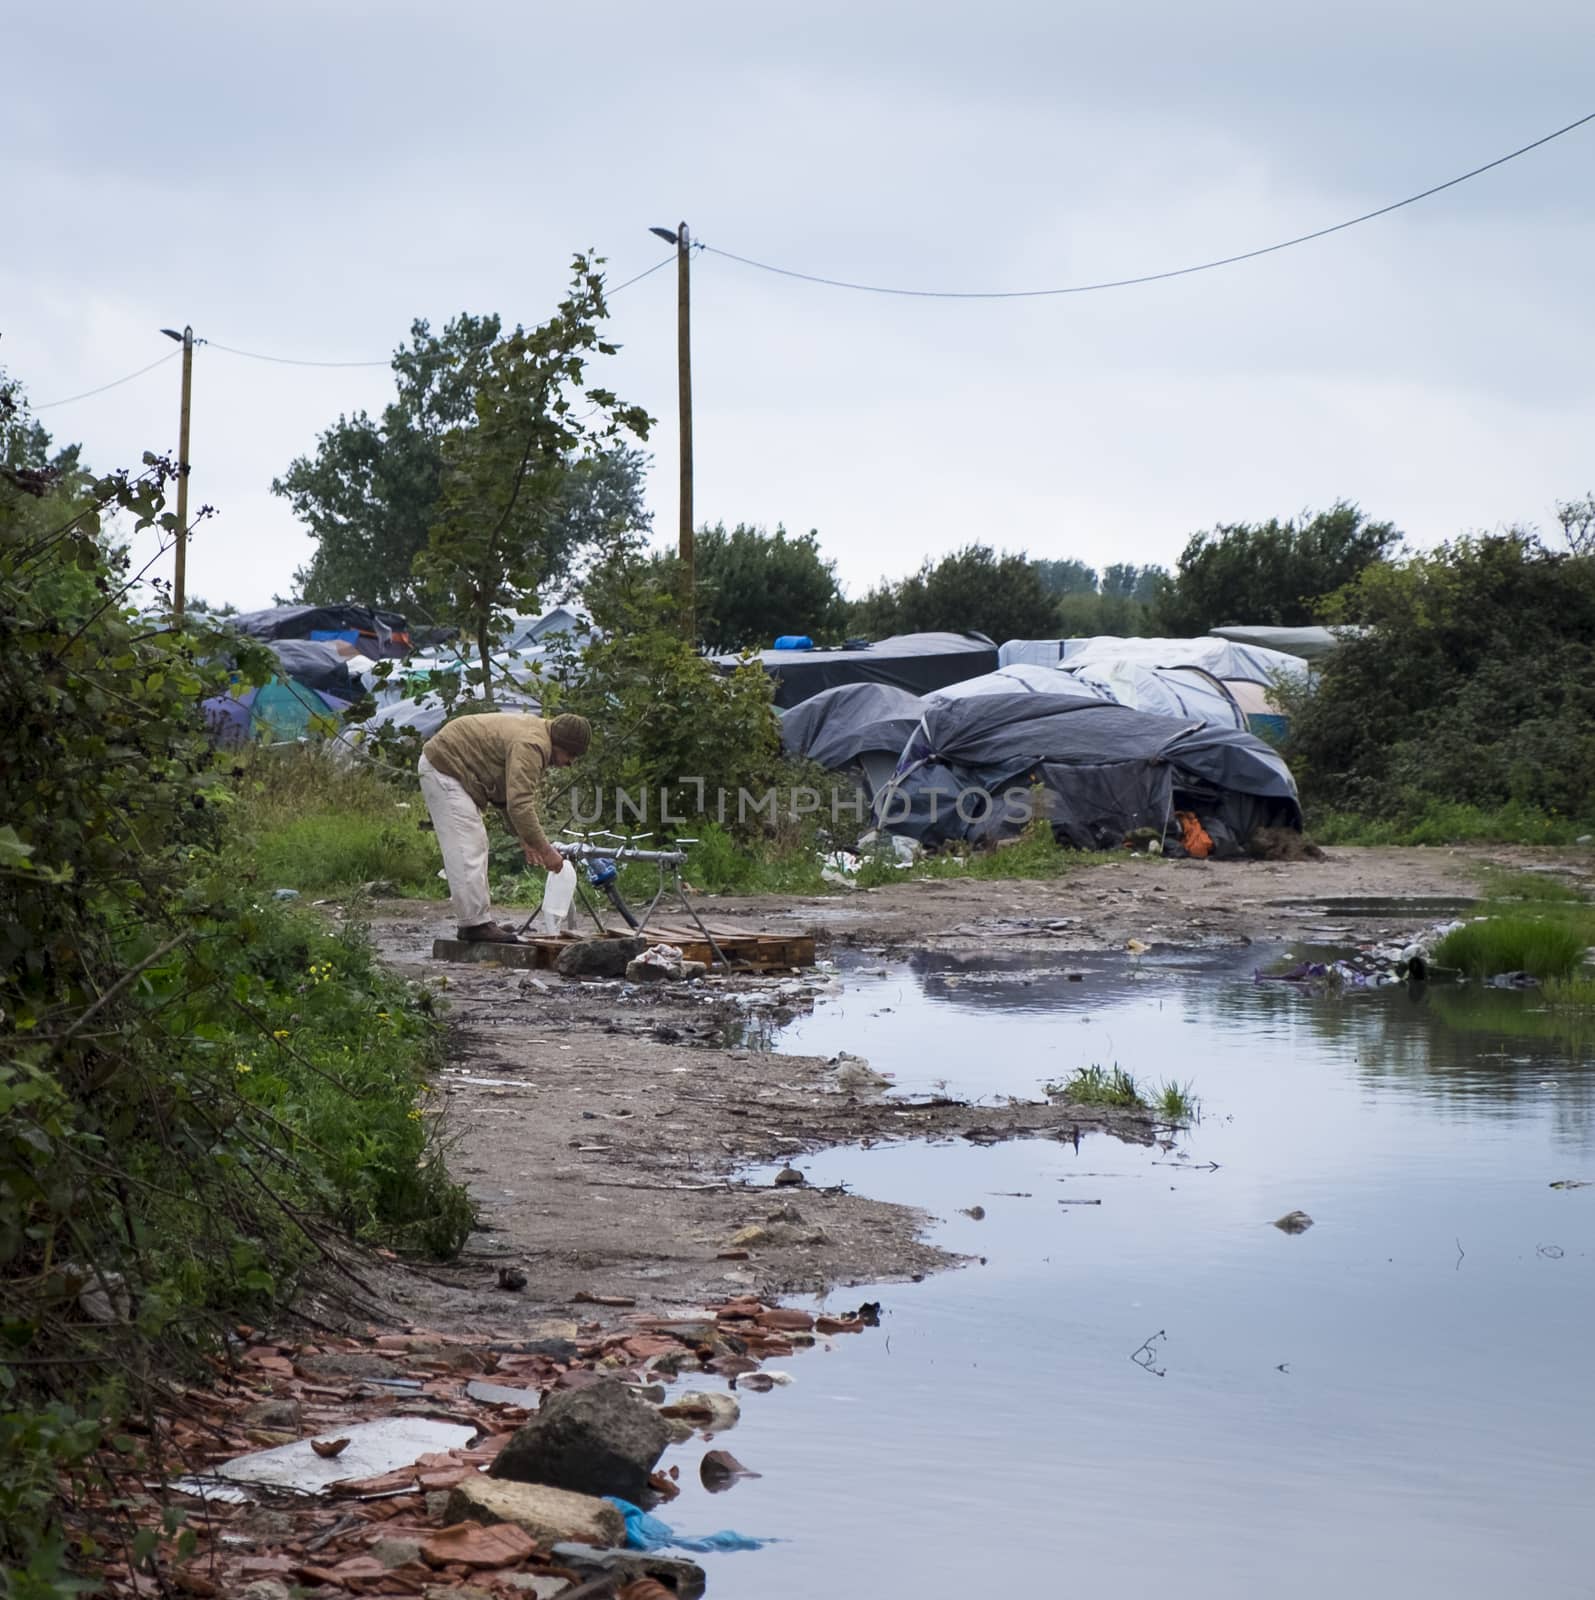 FRANCE, Calais:  A man collects water at the New Jungle refugee and migrant camp near Calais, France, on September 17, 2015.	Refugees and migrants trying to enter the UK from France are facing dropping temperatures and poor sanitation at the makeshift camp.